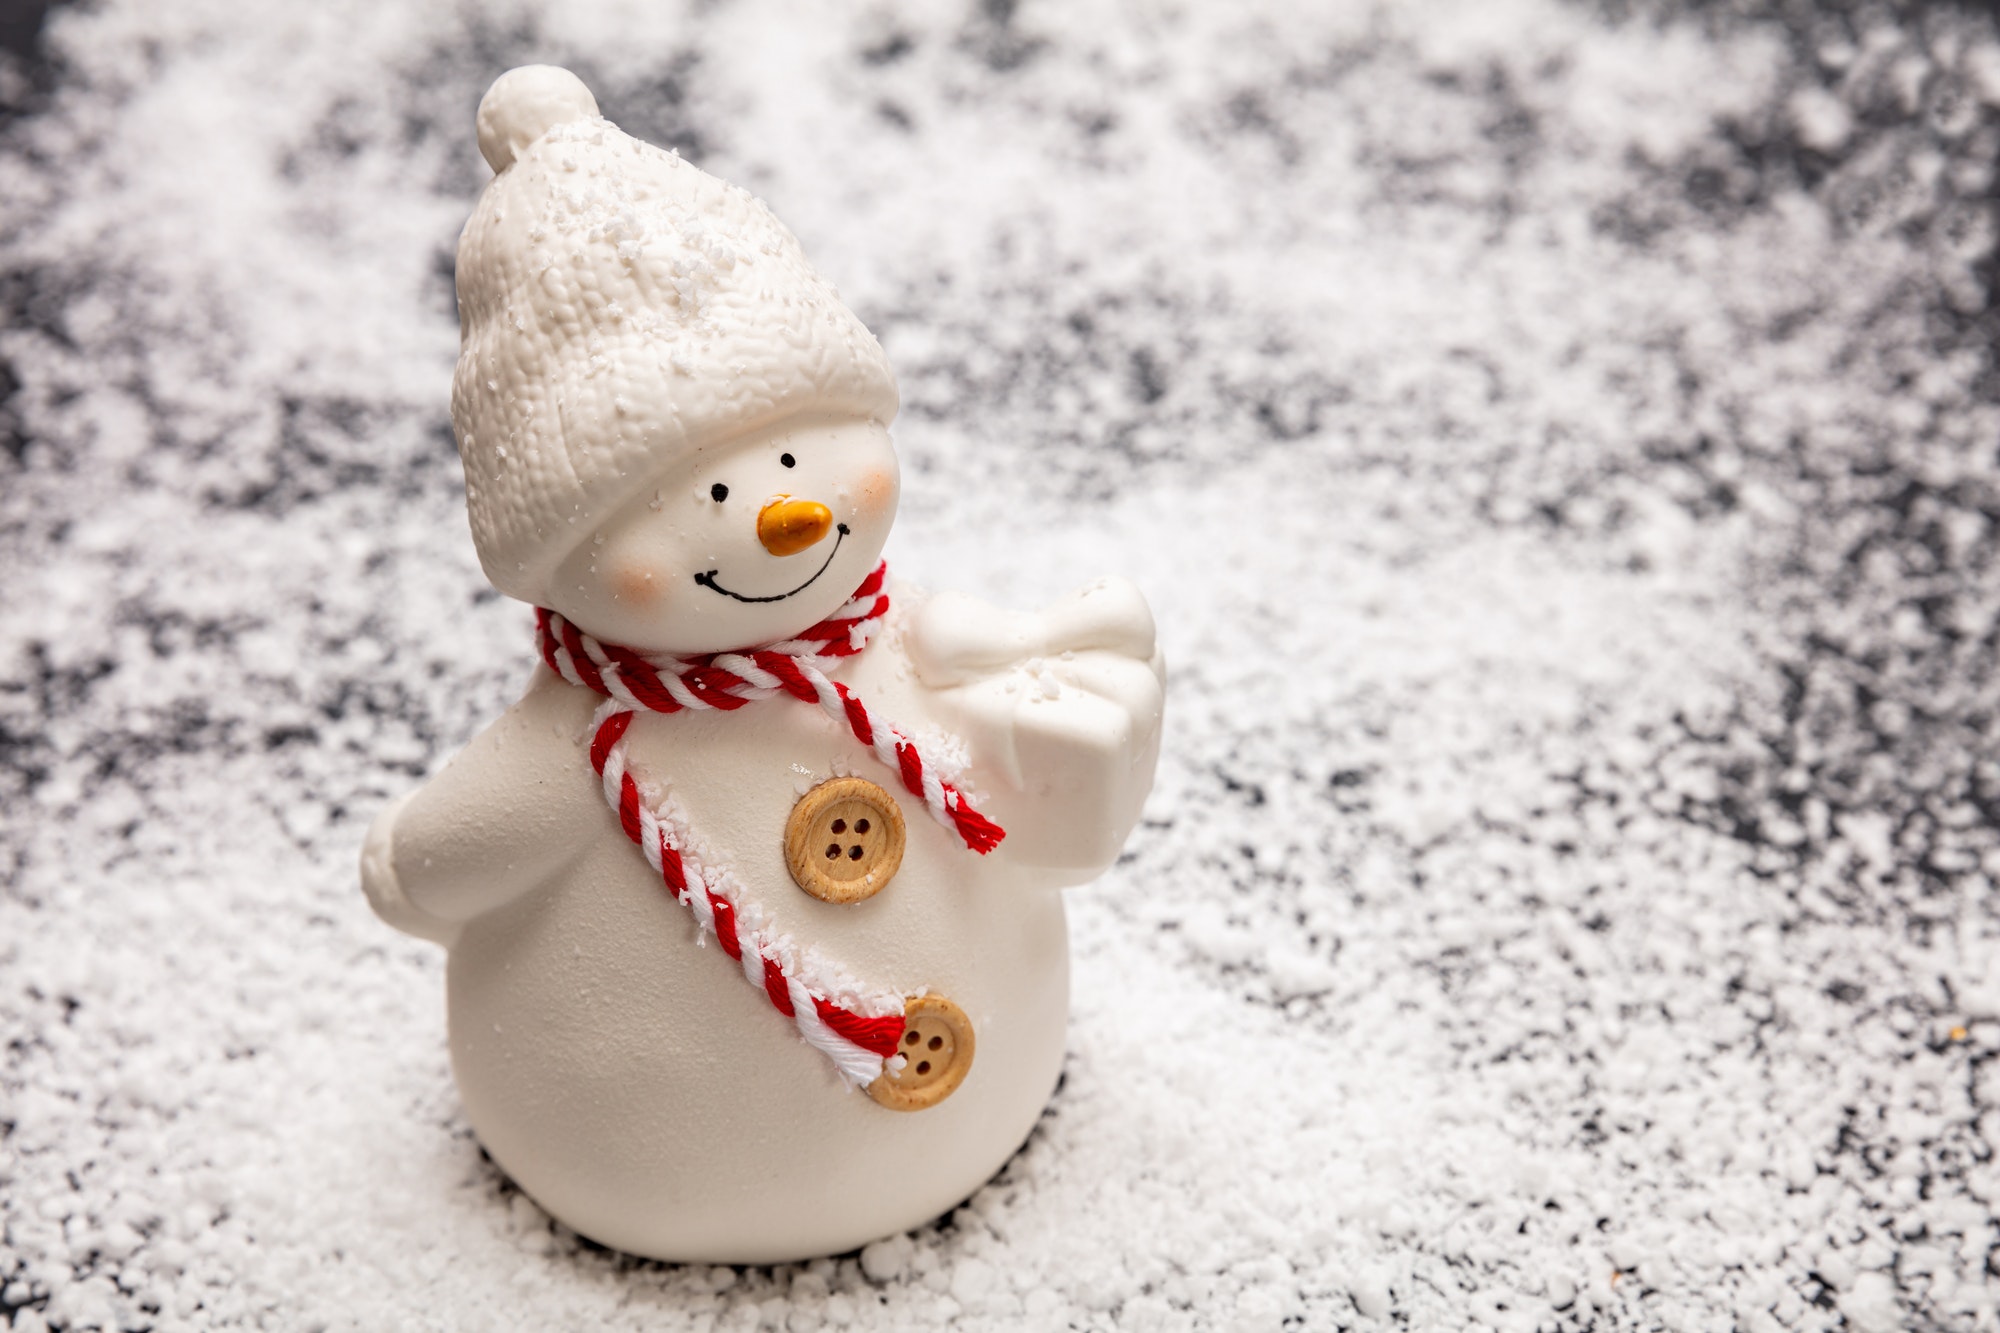 Snowman on snowy background, copy space